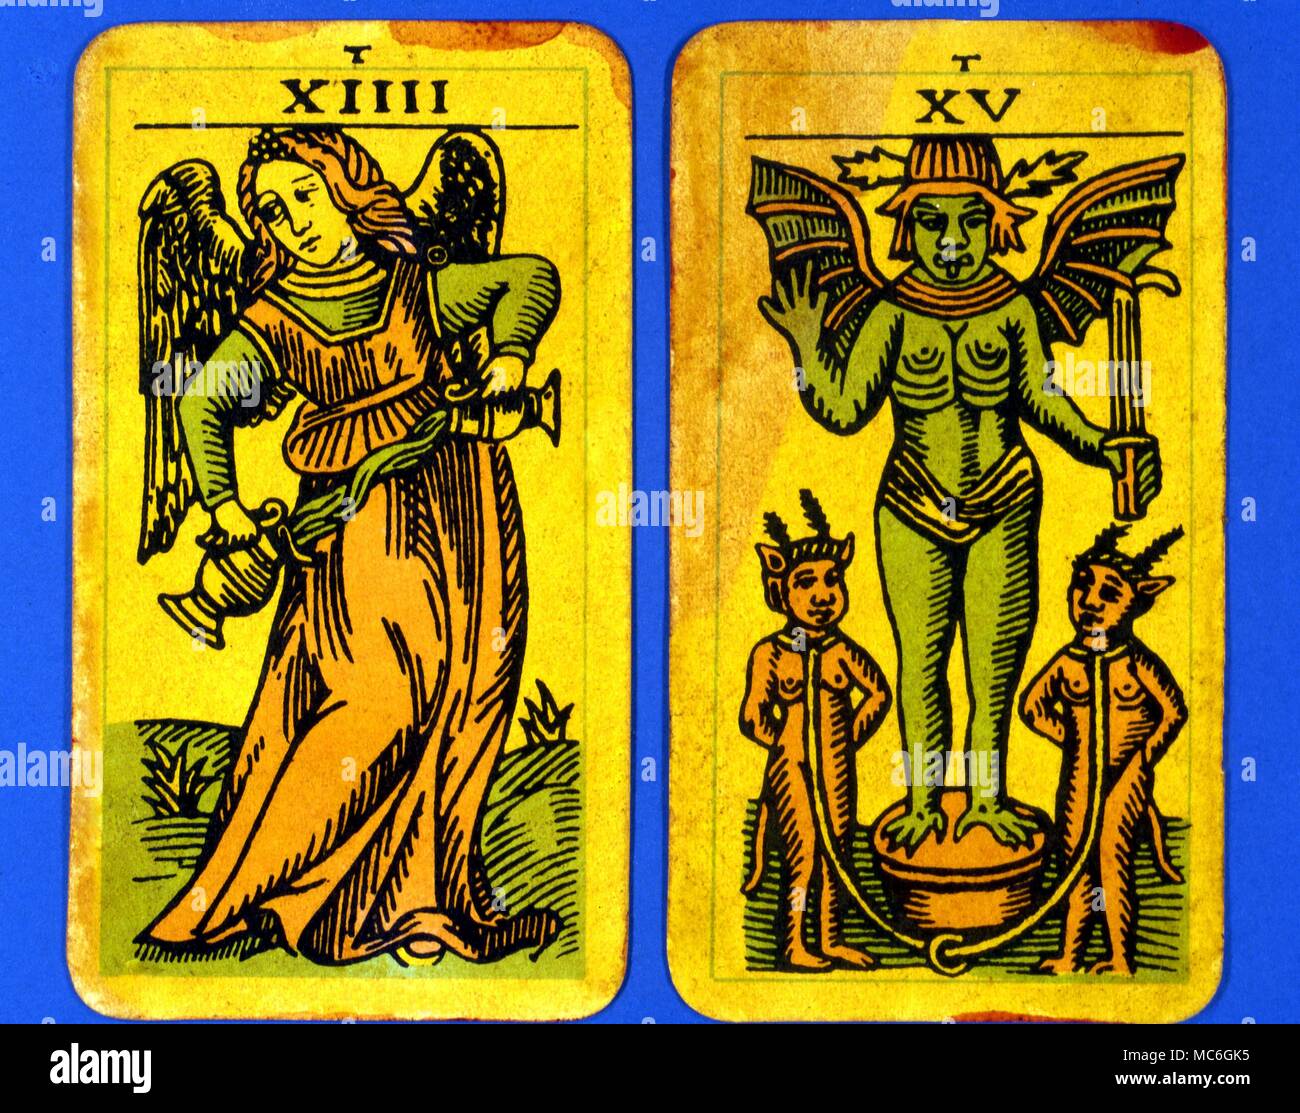 Tarot Cards-Majo Arcana- The Parisian Tarot. Card 14. The Temperance and Card 15. The Devil, The Death Card. Two cards from a Major Arcana picture Tarot, probably designed in an archaizing style in loose imitation of the Rosicrucian deck designed by Pamela Coleman Smith, alongside A.E.Waite, and various earlier decks, such as that published by Encausse (Papus) in The Tarot of the Bohemians at the end of the 19th century, post 1905, but earlier than 1912. The name Parisian Tarot was given by the owner of the deck - it might however be called the Tau Tarot, from the intriguing letter Tau at the Stock Photo